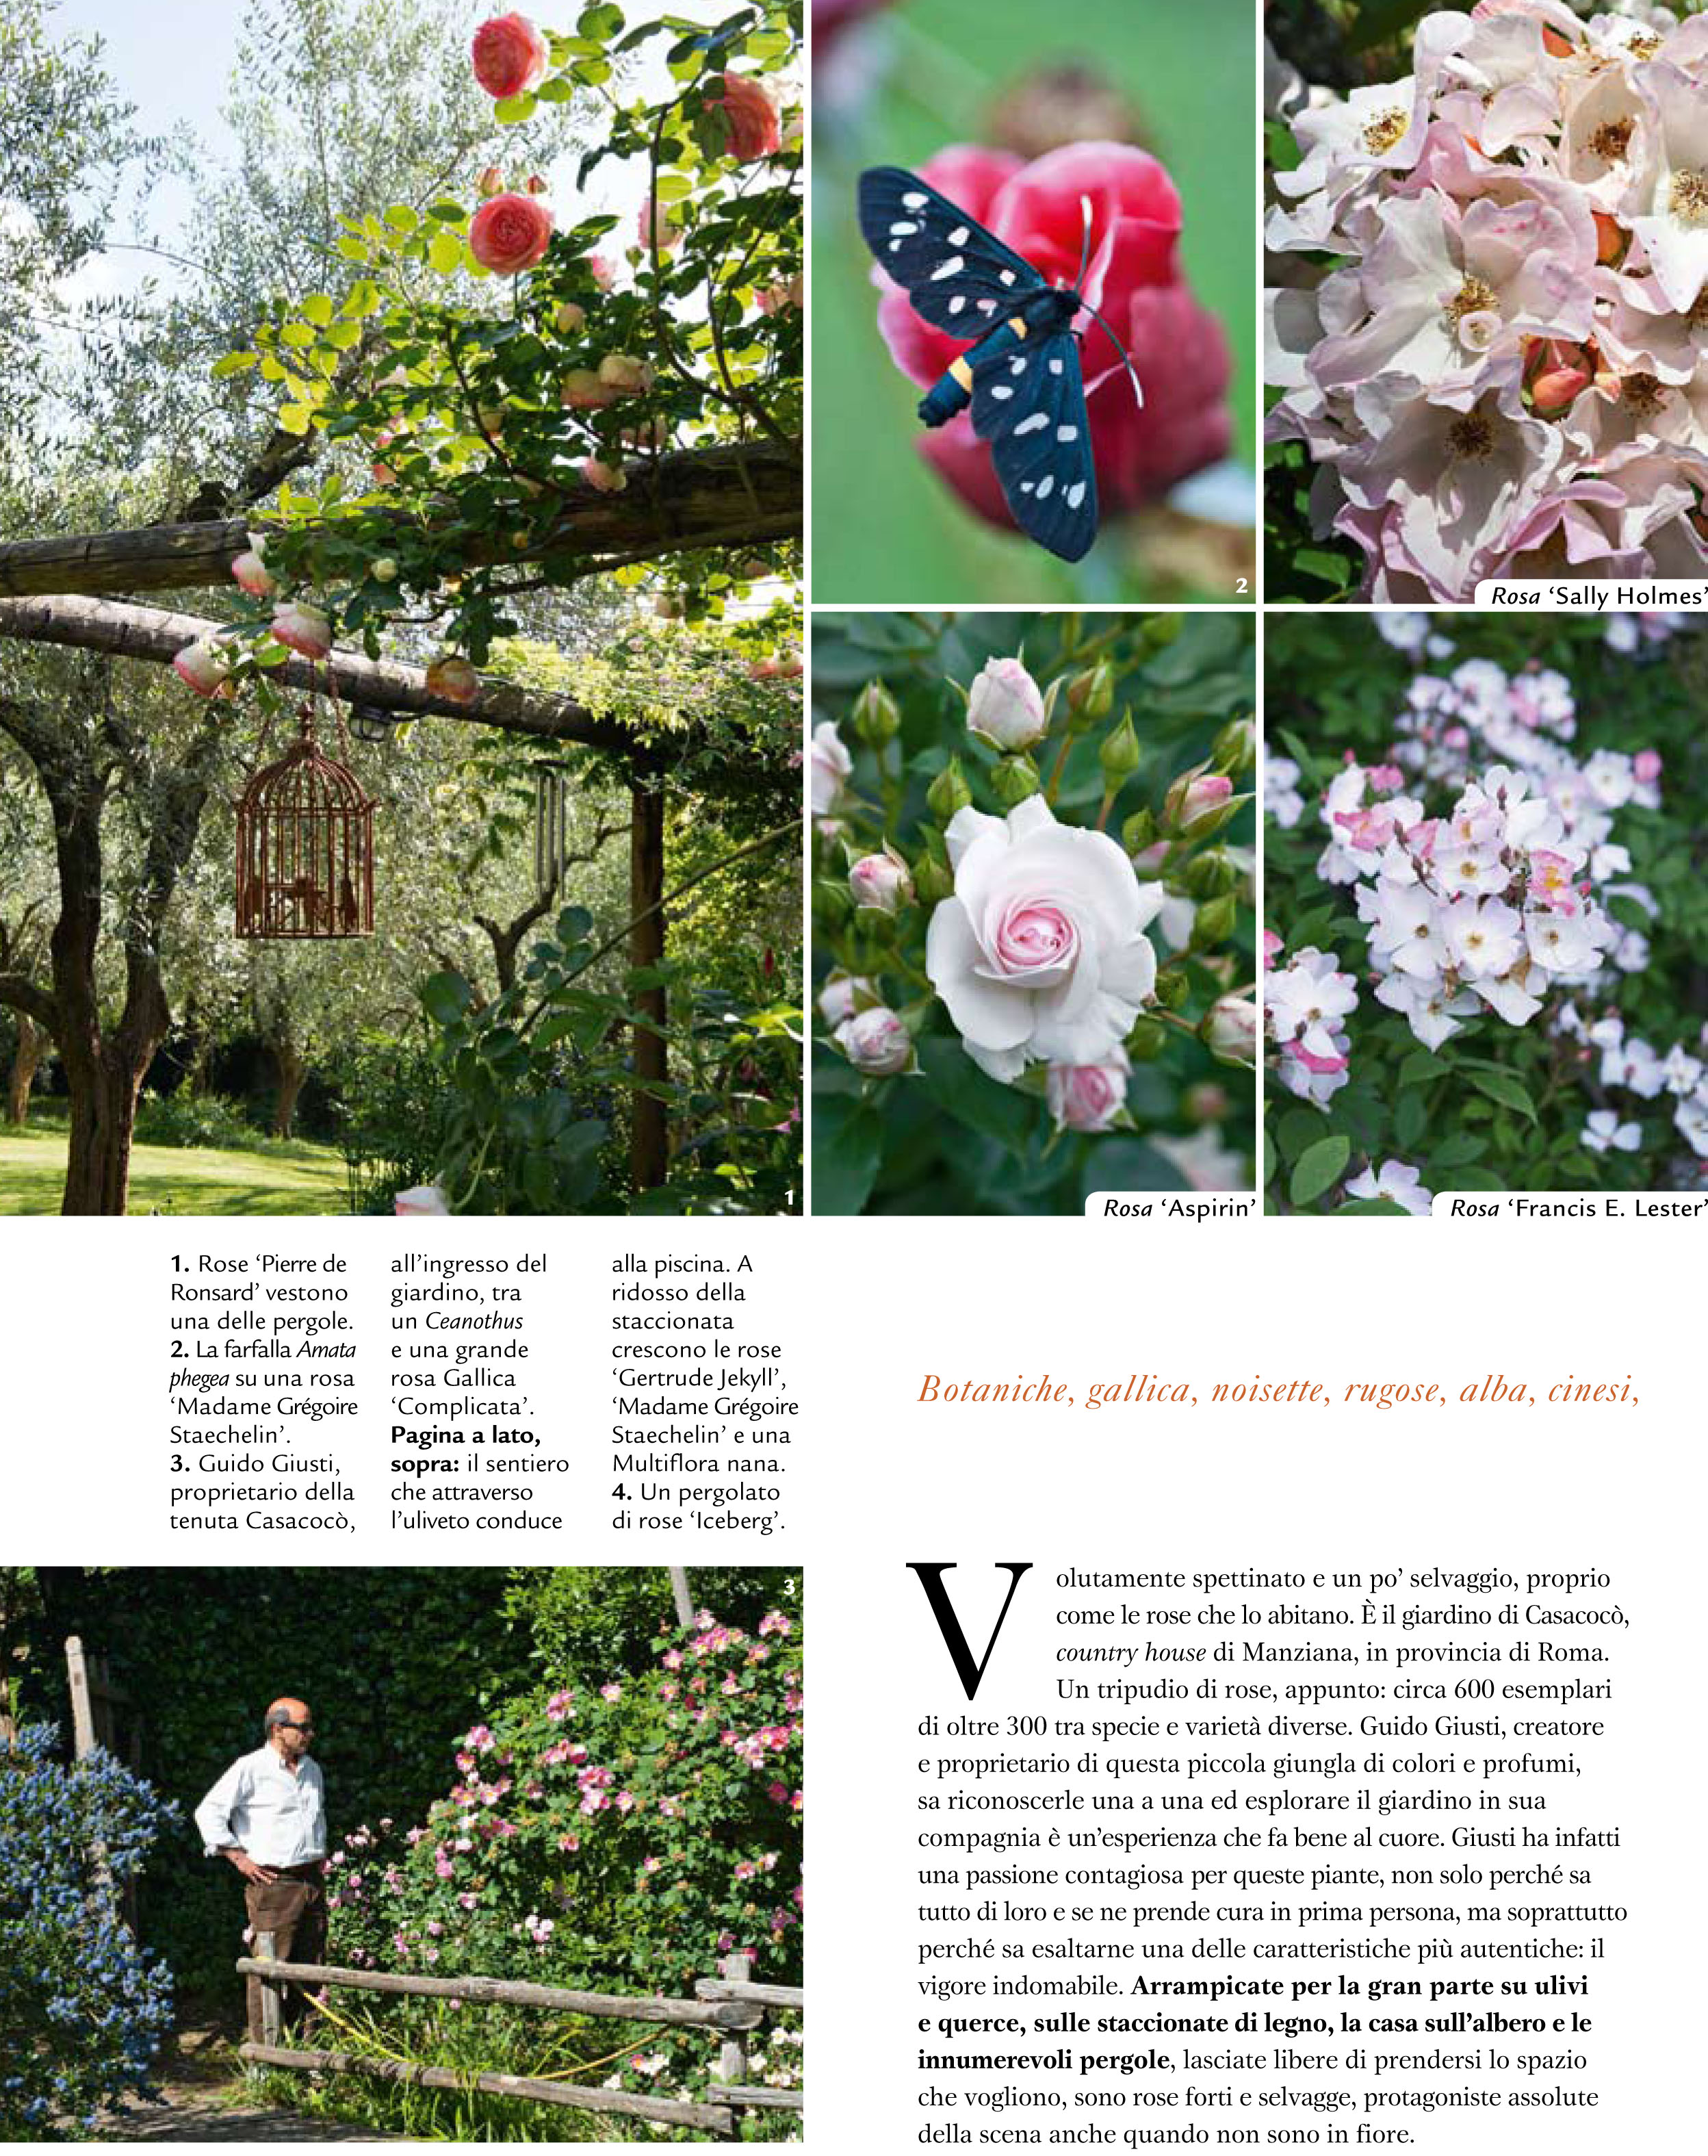 Gardenia October 2014 - in this photo: "Sally Holmes", "Aspirin", and "Francis E. Letter" roses